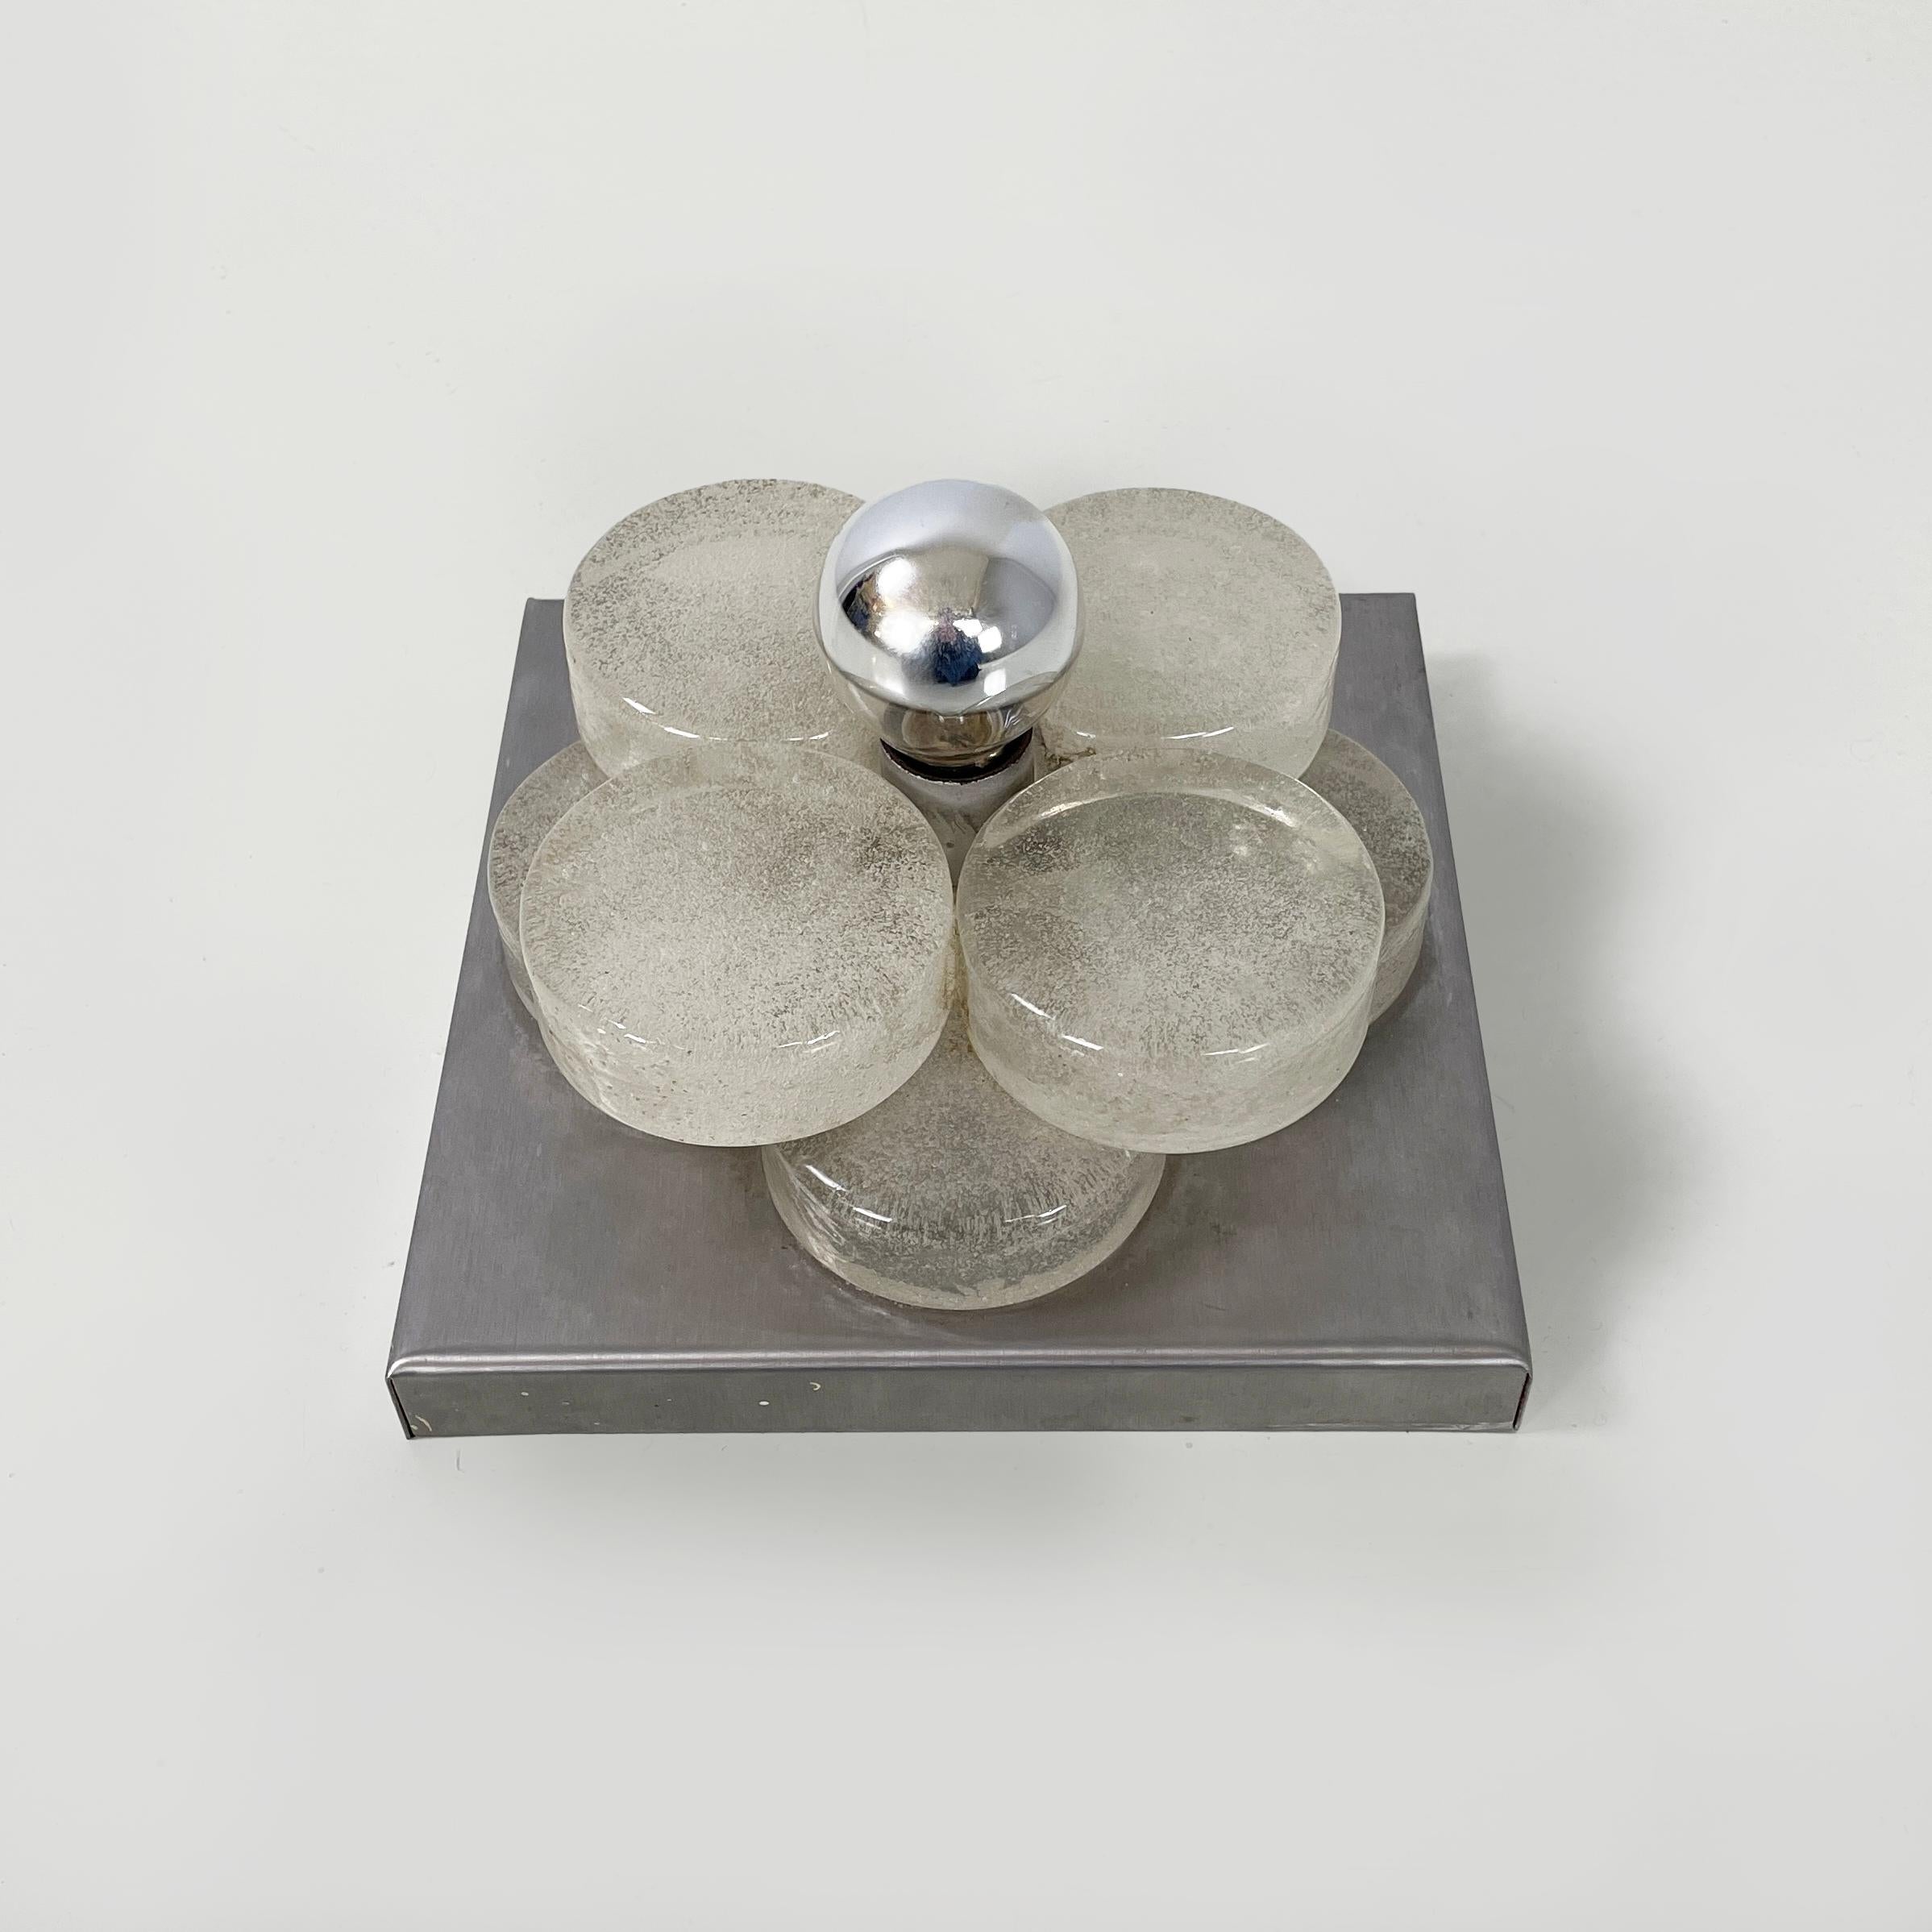 Italian modern pulegoso glass and metal Wall lamp in by Albano Poli for Poliarte, 1970s
Wall lamp with square base in sheet metal. The diffuser is made up of a series of 8 thick discs in pulegoso glass, characterized by small bubbles. The discs are